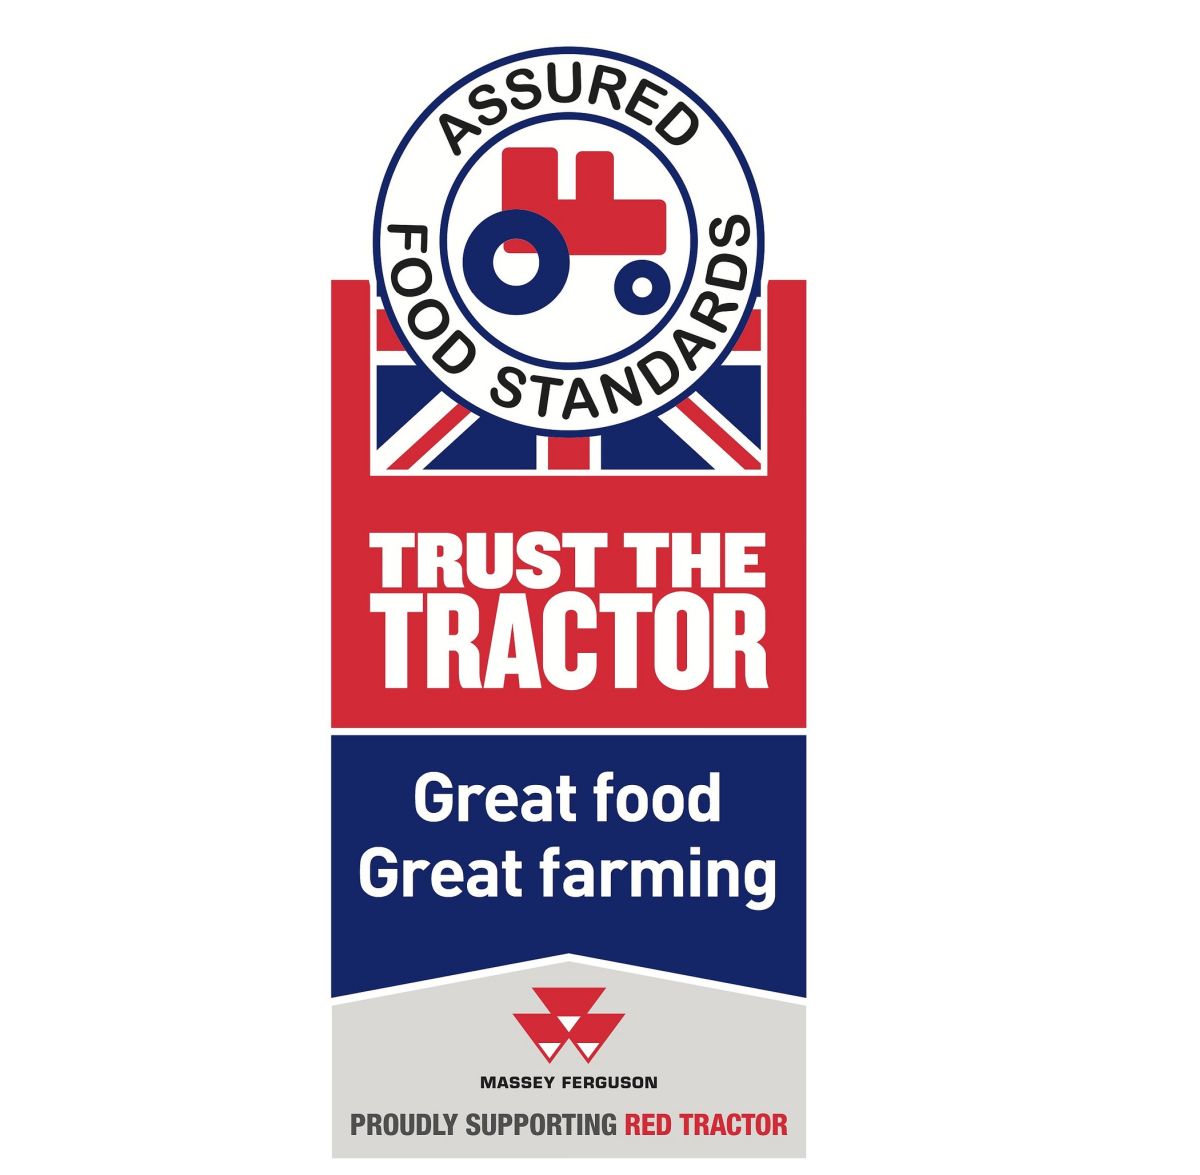 15,000 farm trailers to be stickered in Red Tractor campaign